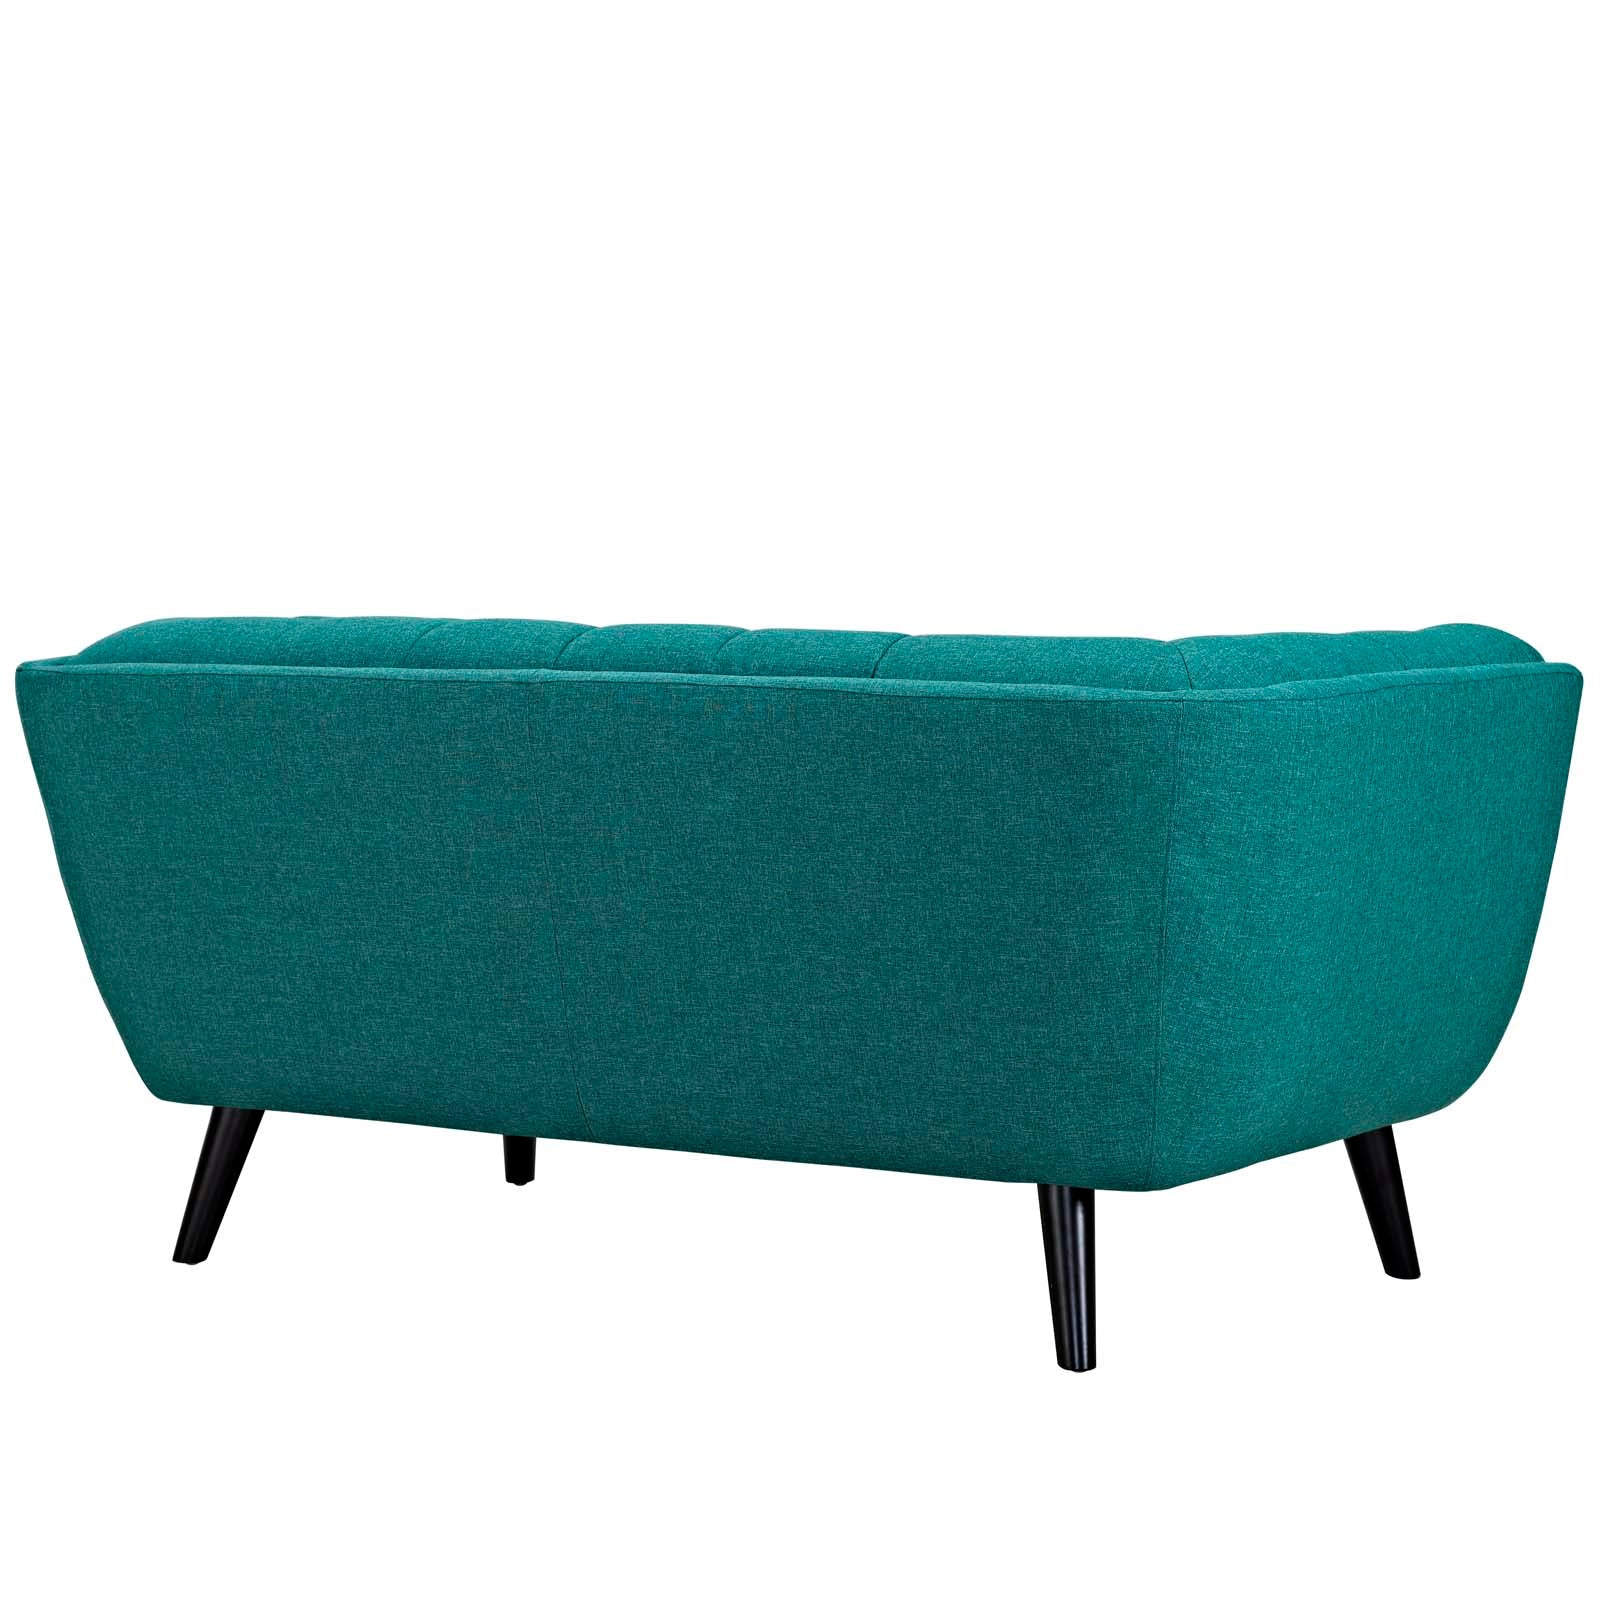 Modway Living Room Sets - Bestow 2 Piece Upholstered Fabric Loveseat and Armchair Set Teal